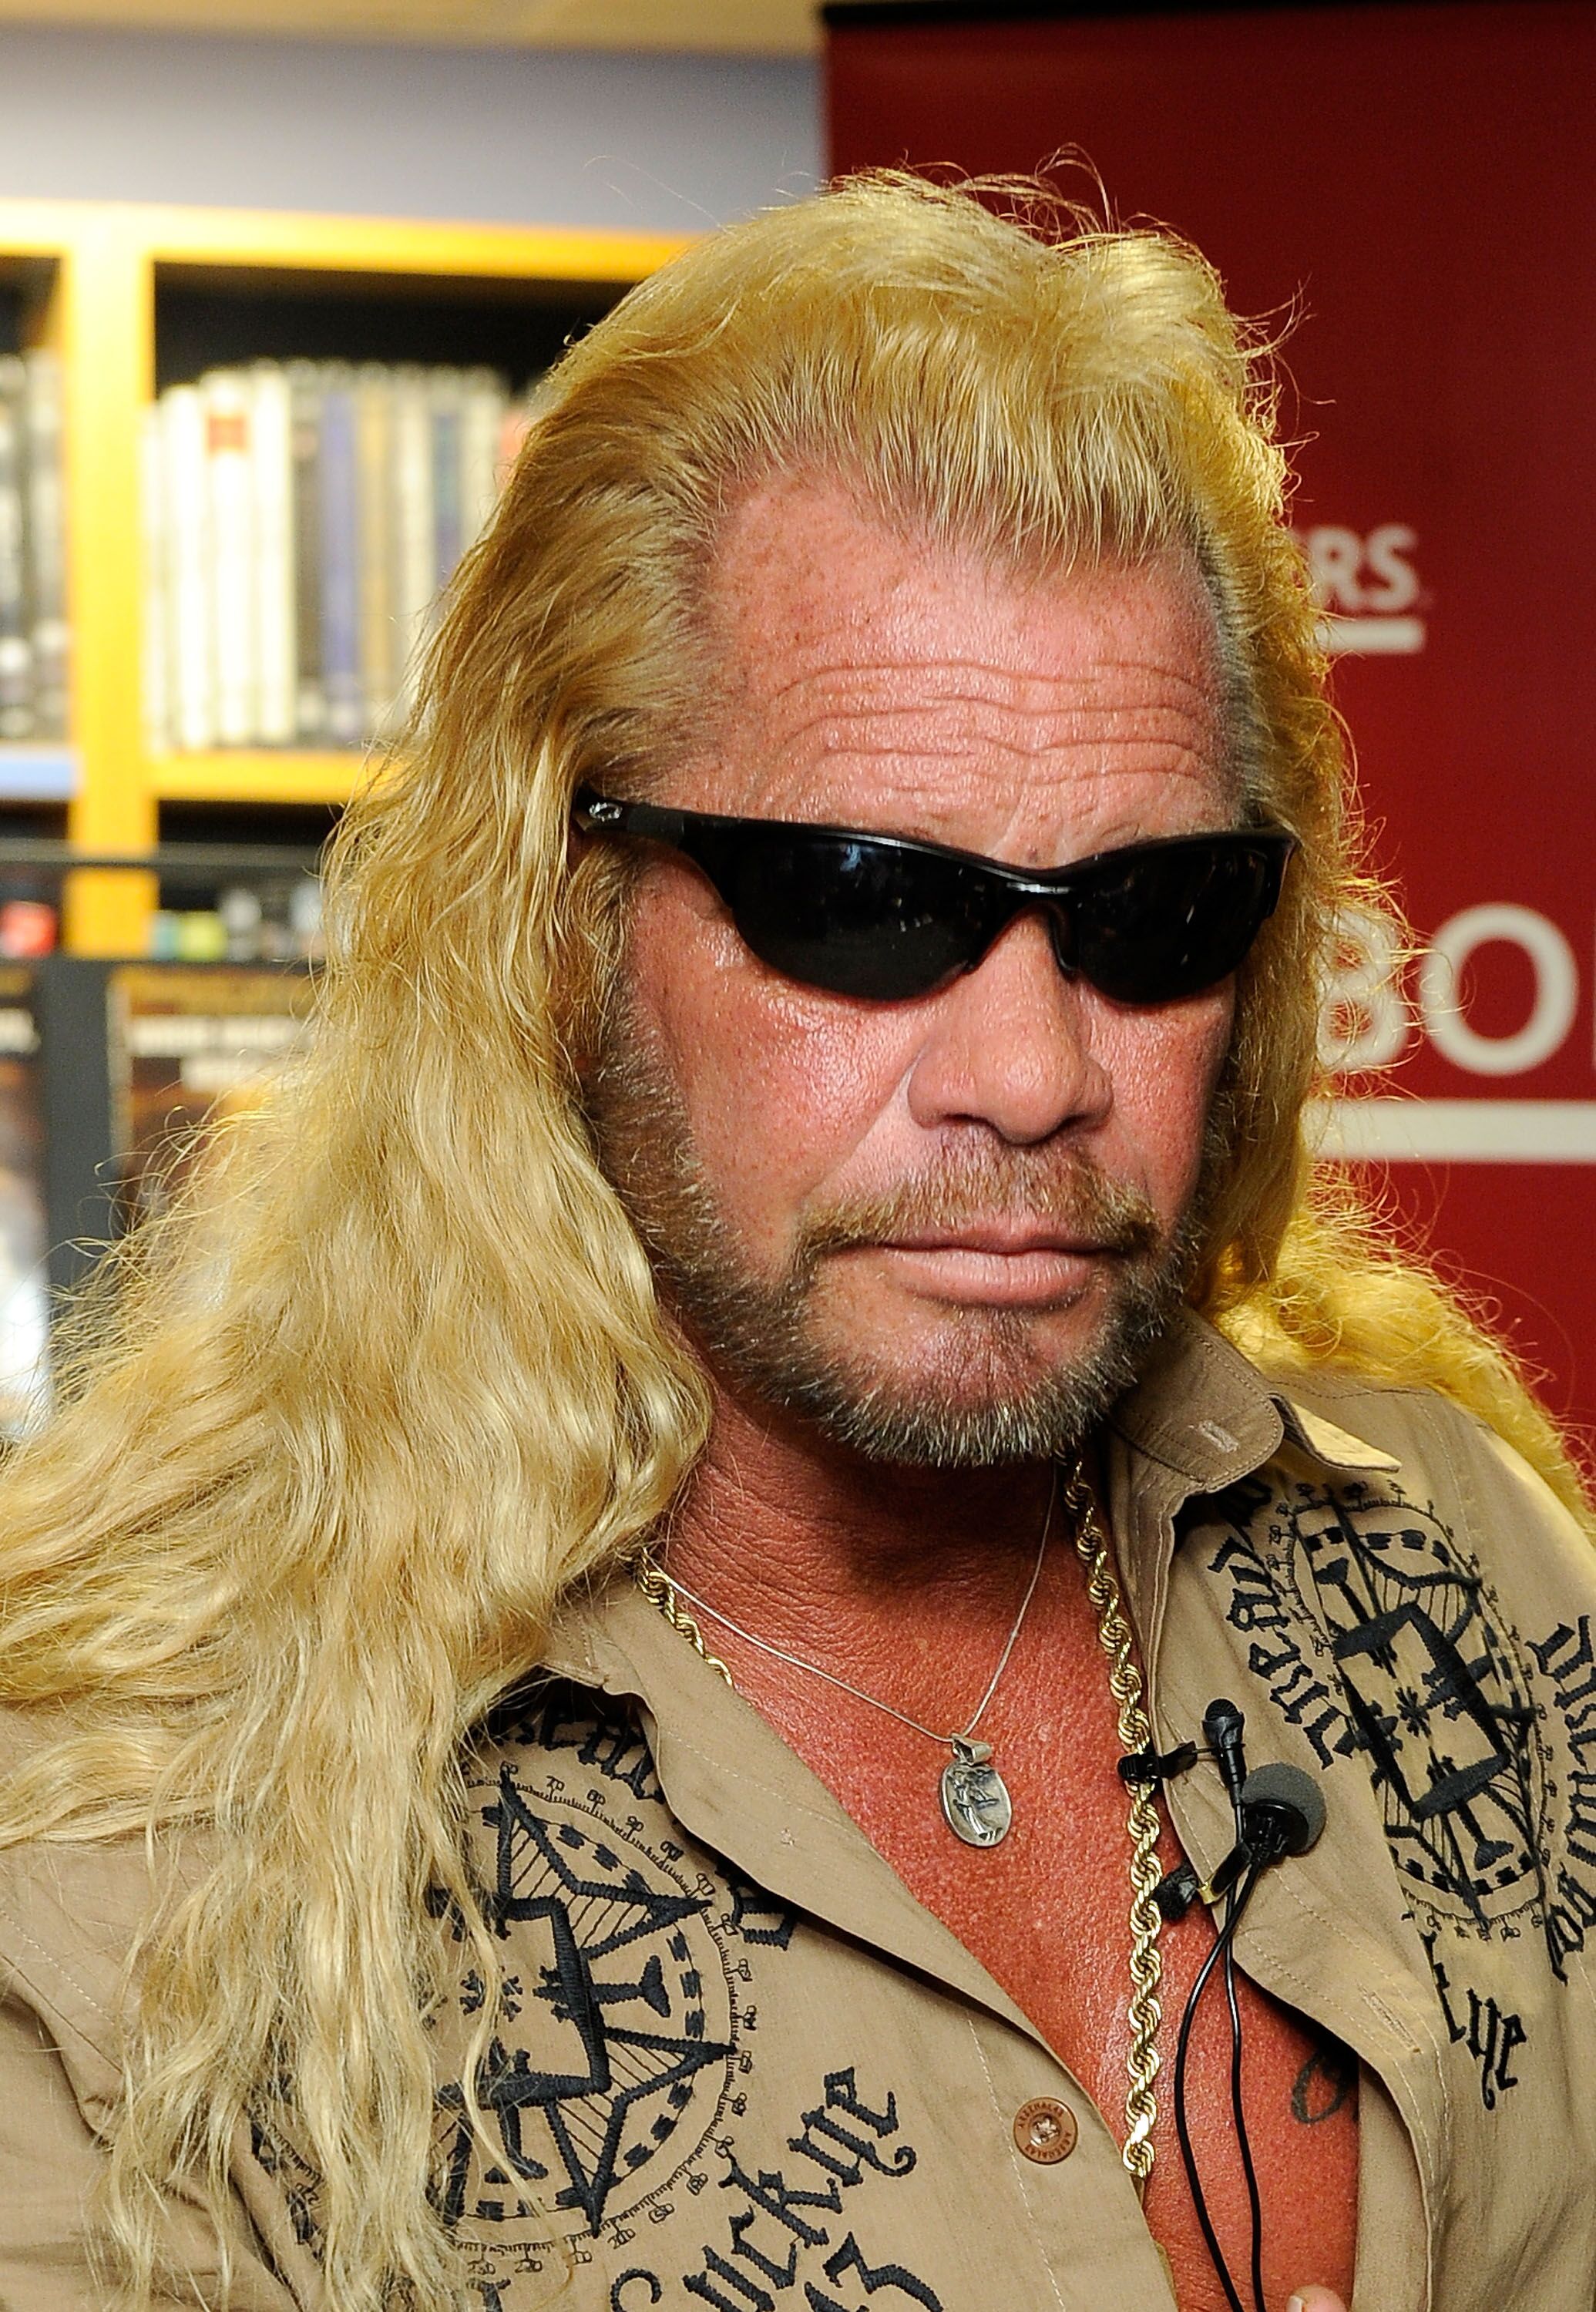 Duane Chapman, known in the media as "Dog the Bounty Hunter" promotes his book "When Mercy Is Shown, Mercy Is Given" at Borders Wall Street | Getty Images / Global Images